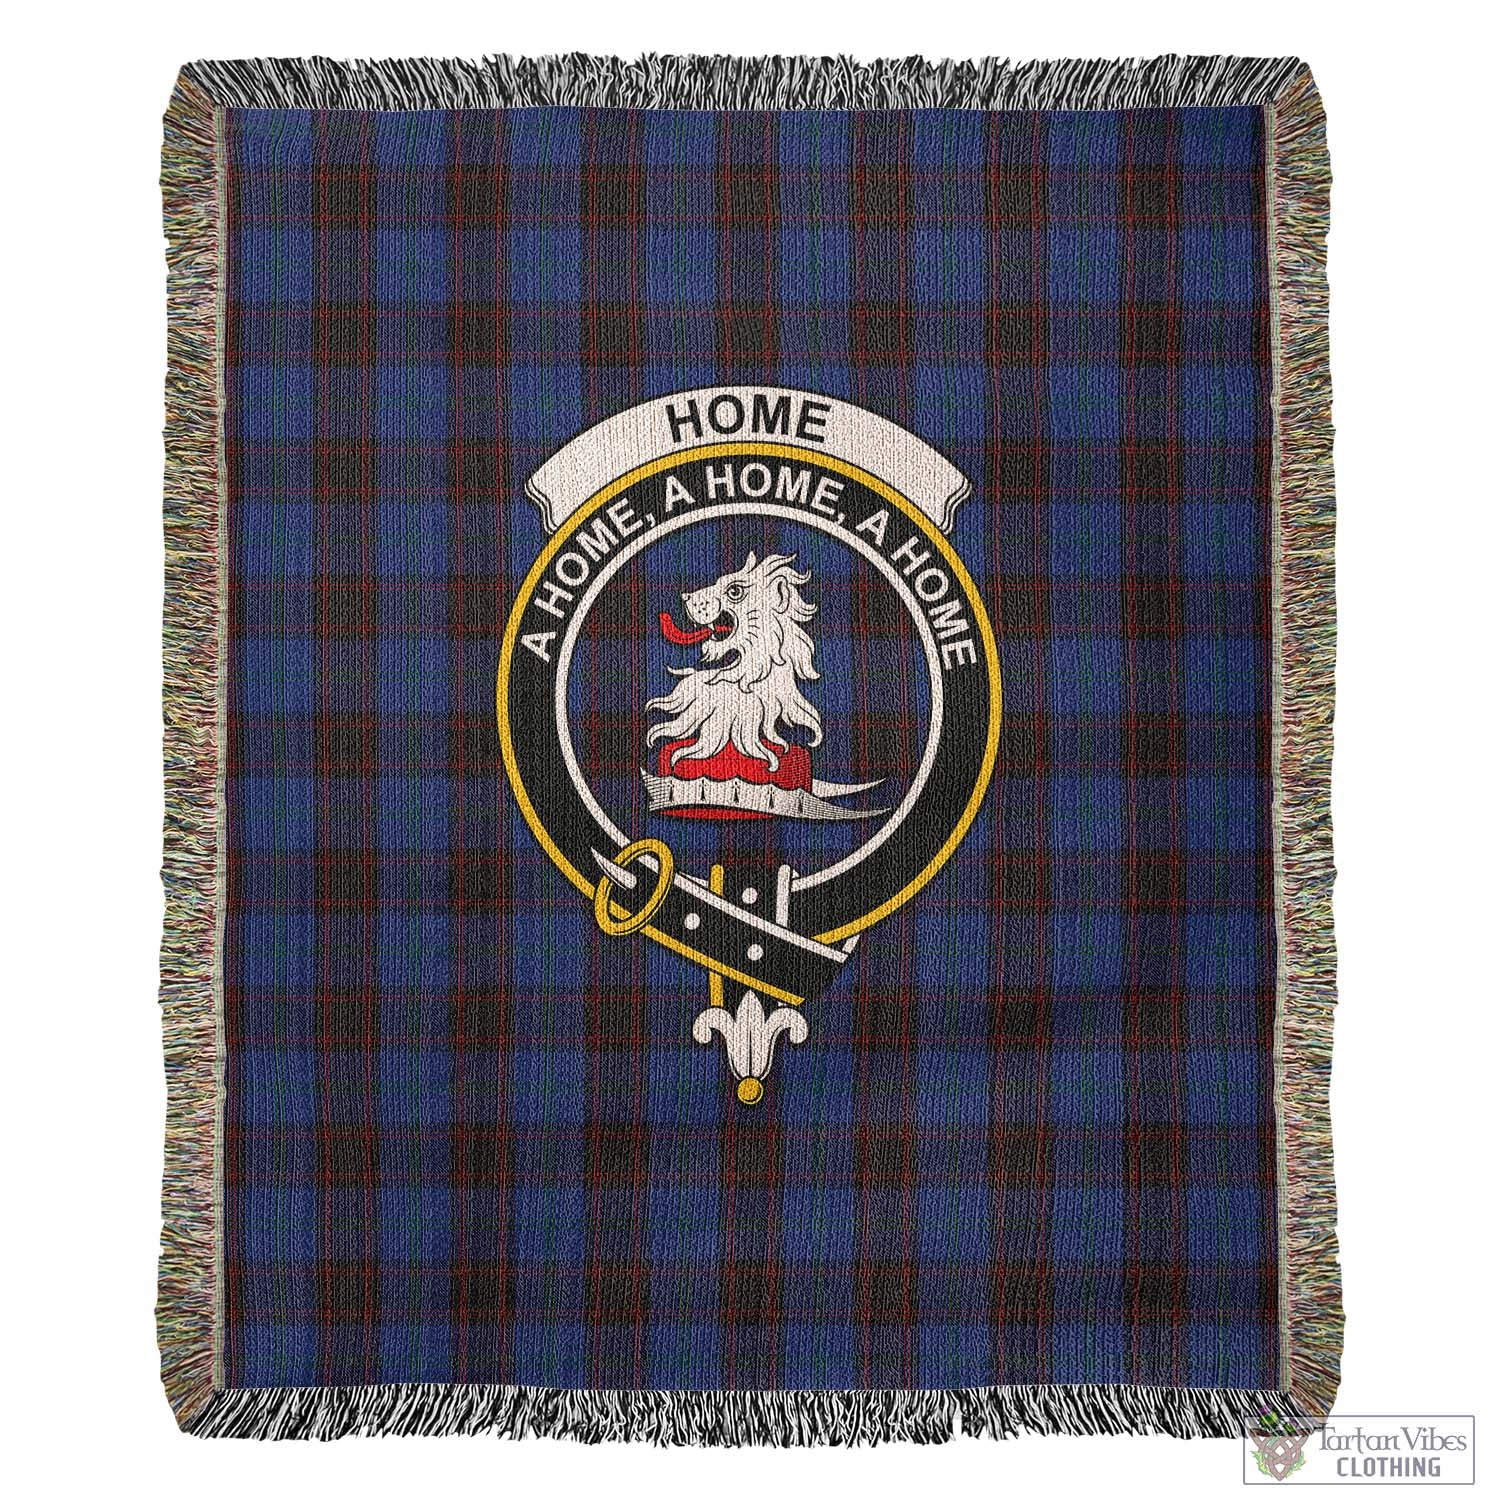 Tartan Vibes Clothing Home (Hume) Tartan Woven Blanket with Family Crest